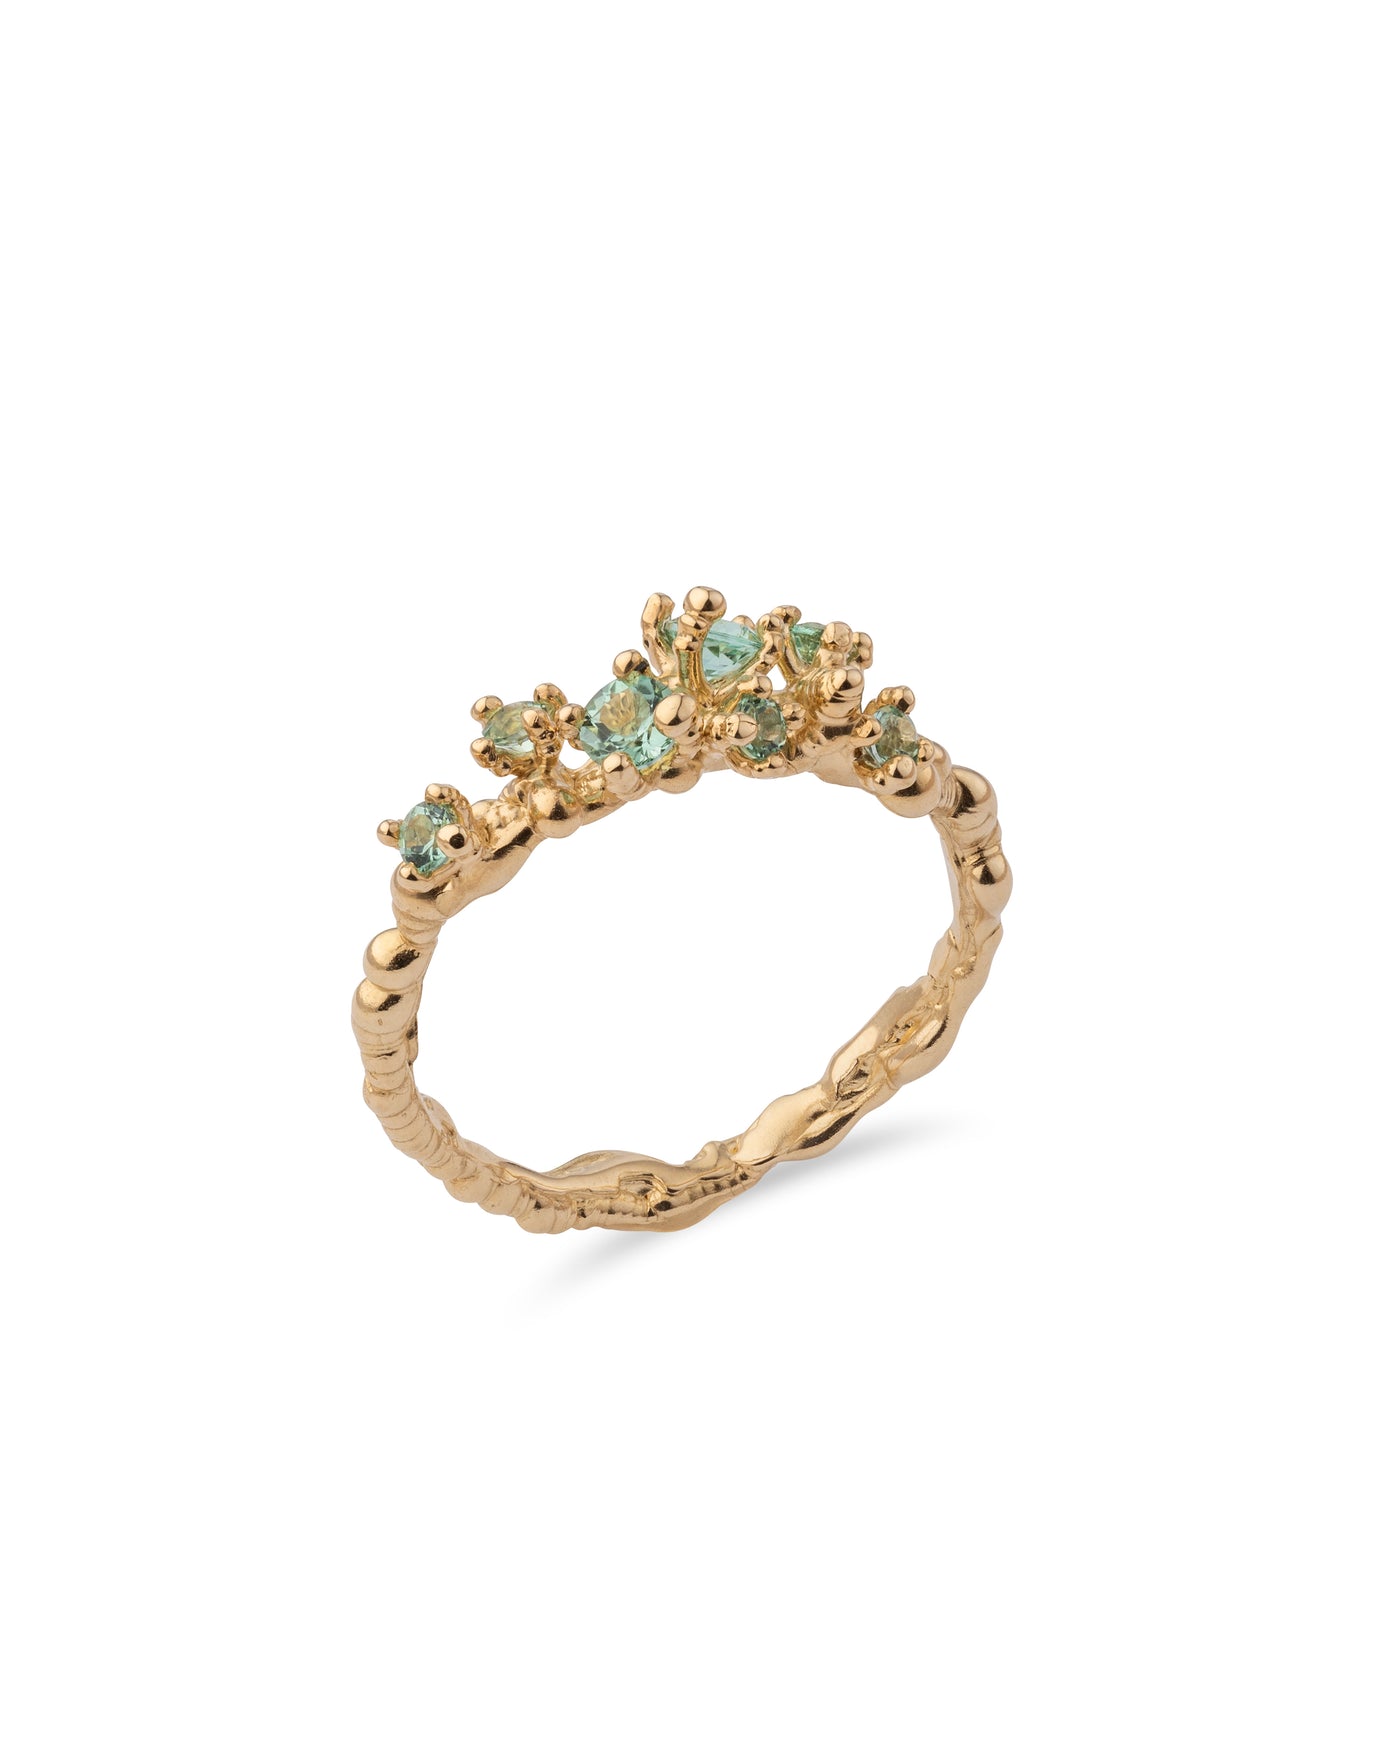 14 k yellow gold ring with tourmalines "Sand play"